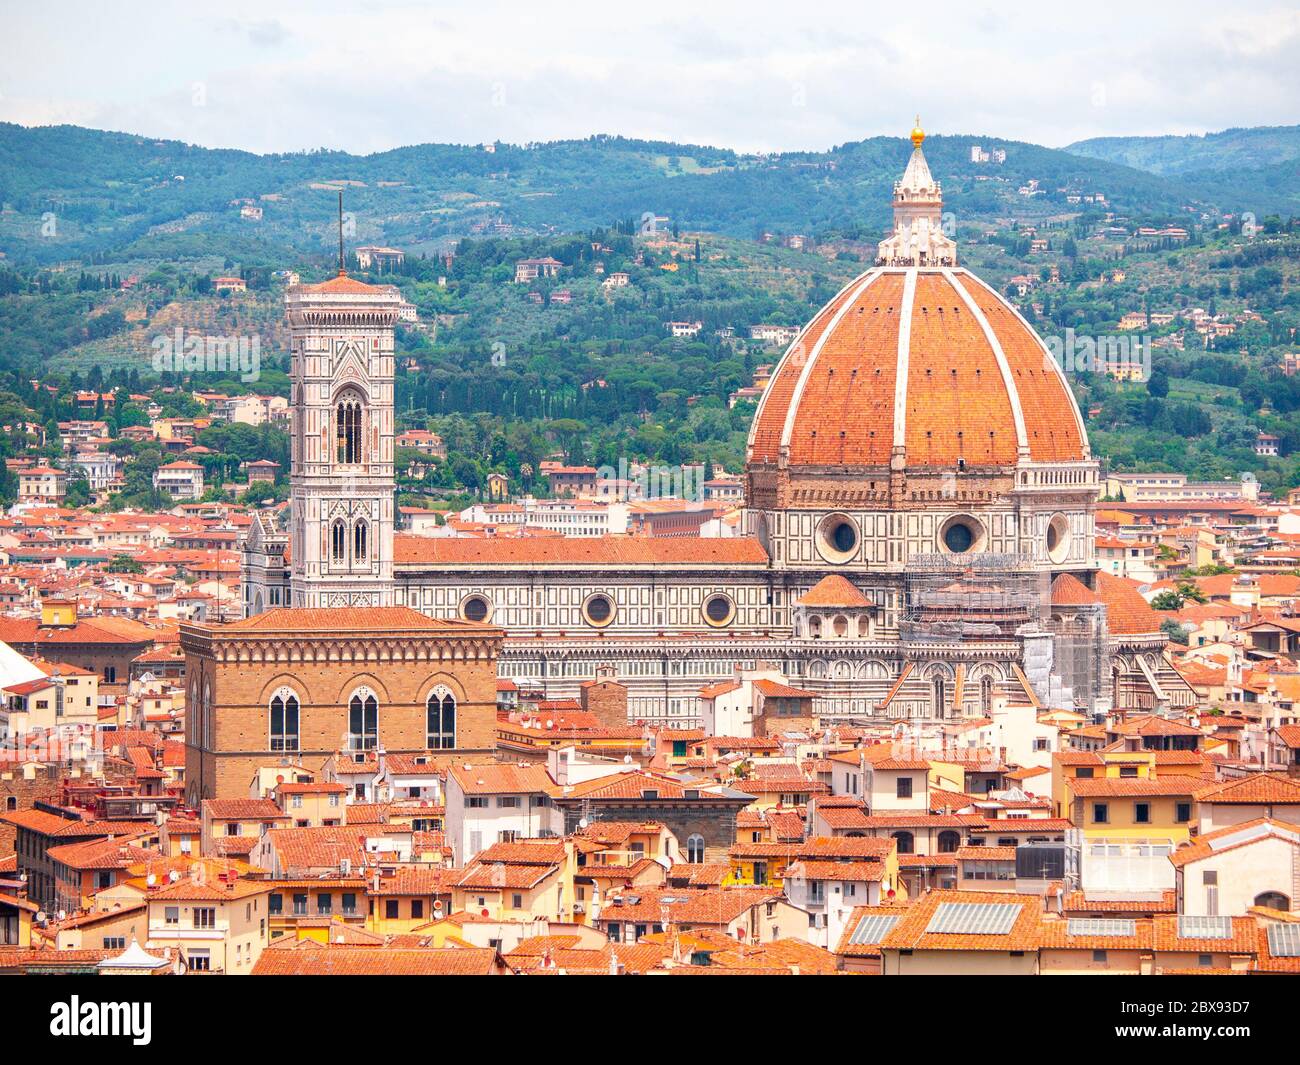 Duomo Santa Maria del Fiore and Bargello in Florence, aka Firenze, Tuscany, Italy. Aerial view of cathedral. Stock Photo